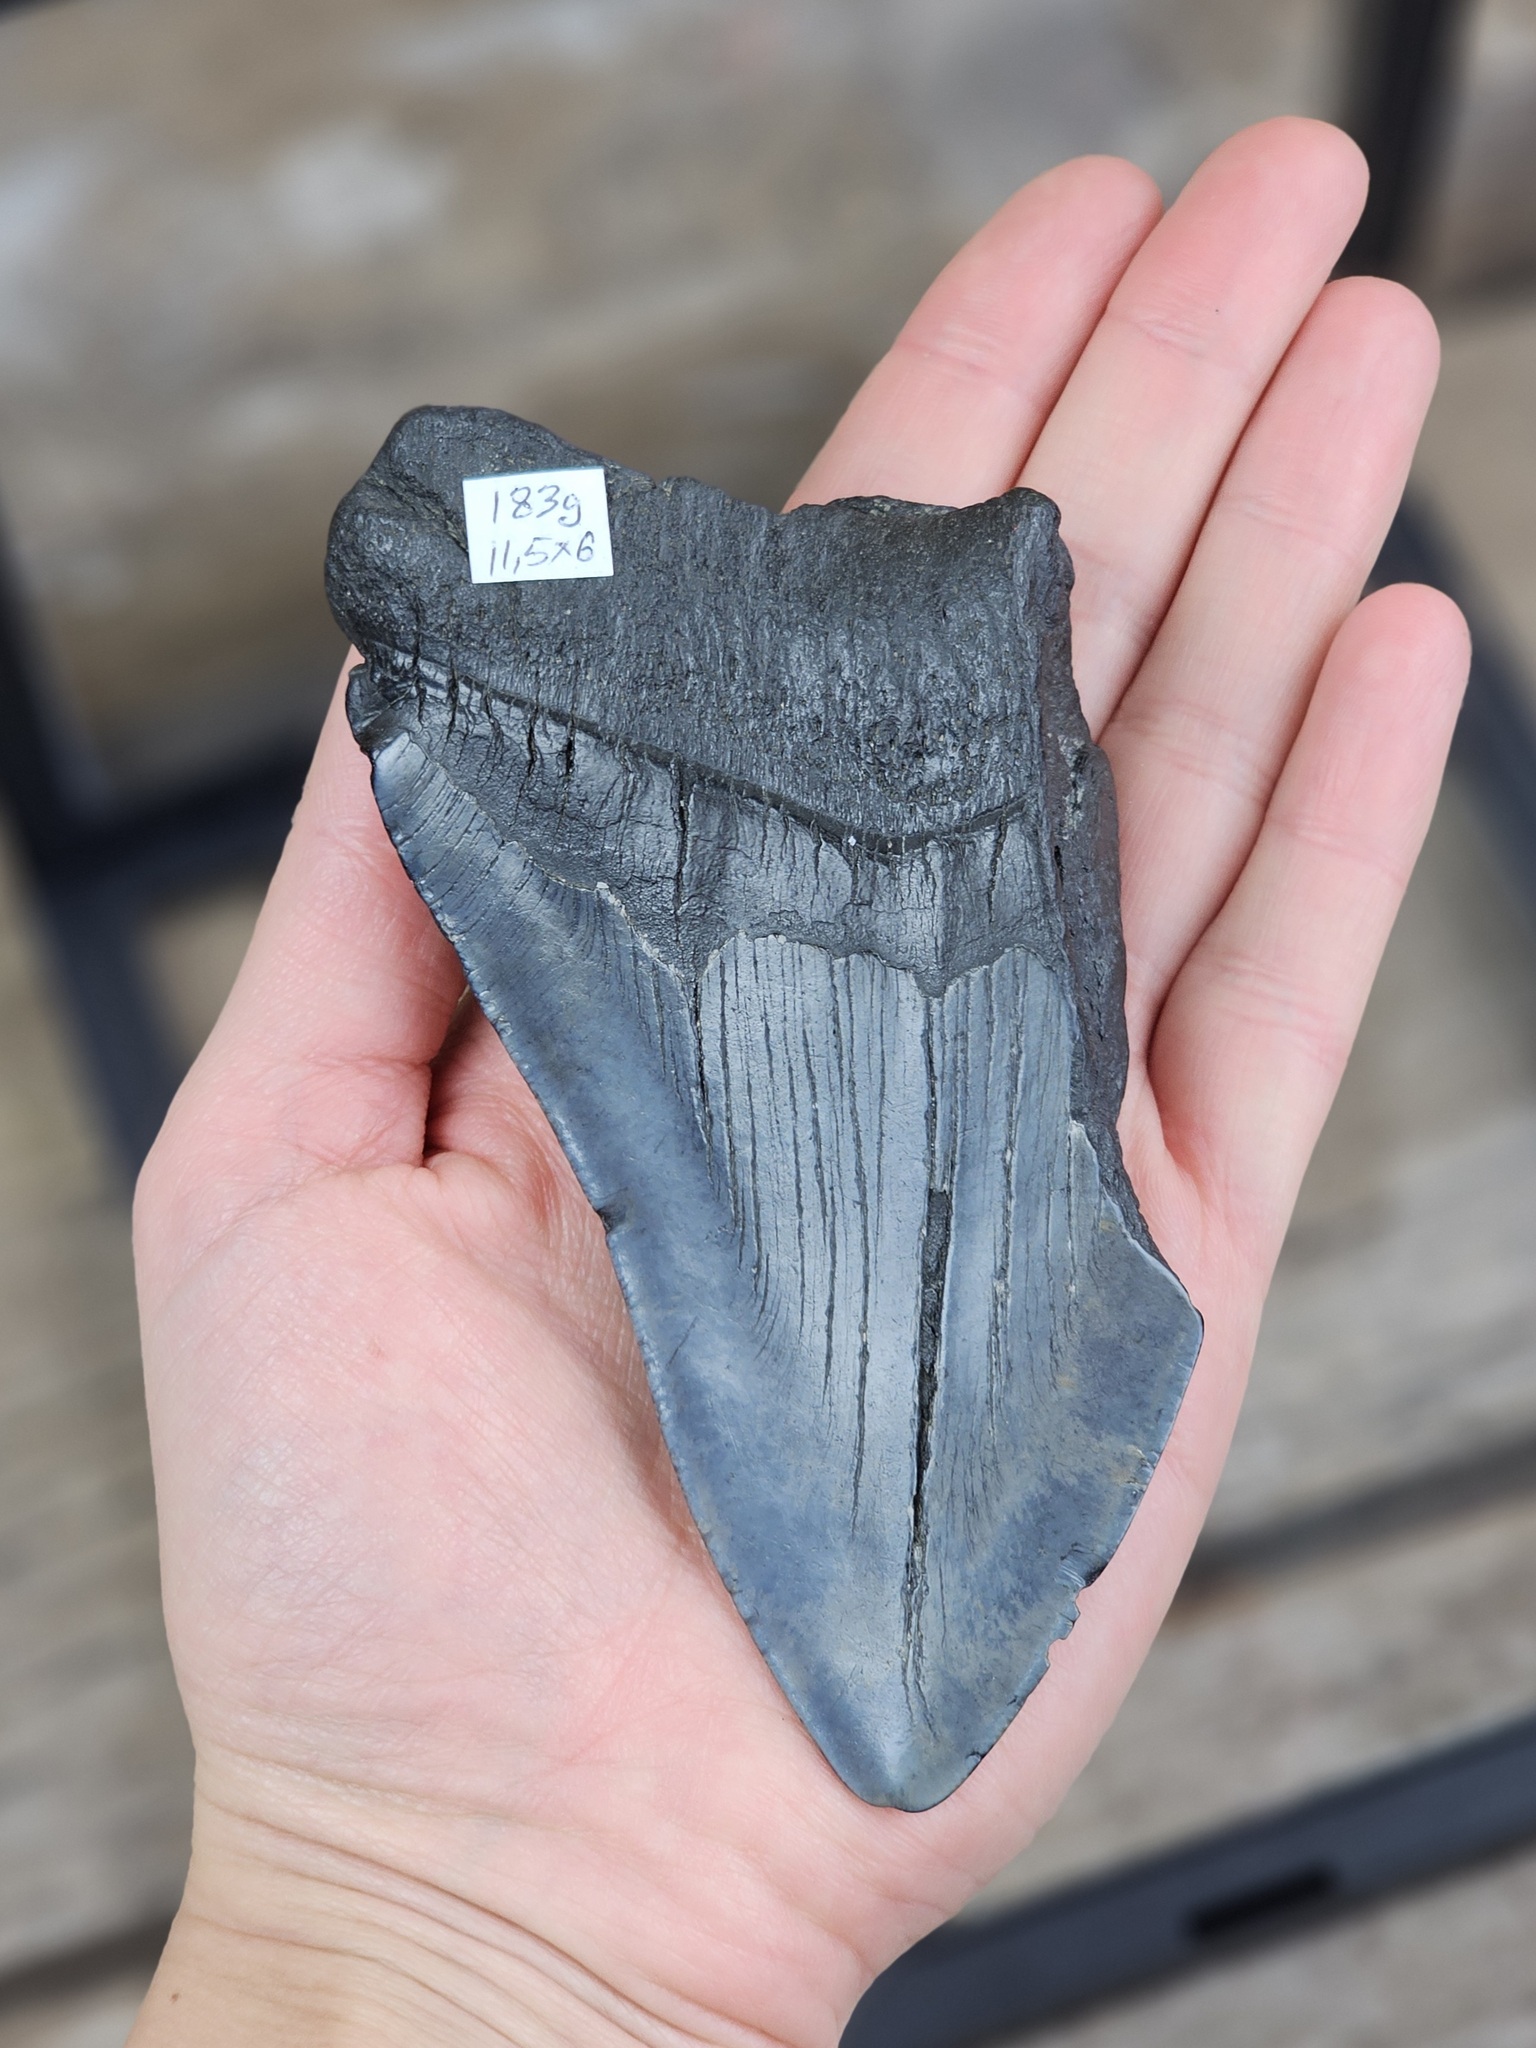 Megalodon tand fossil XL #1